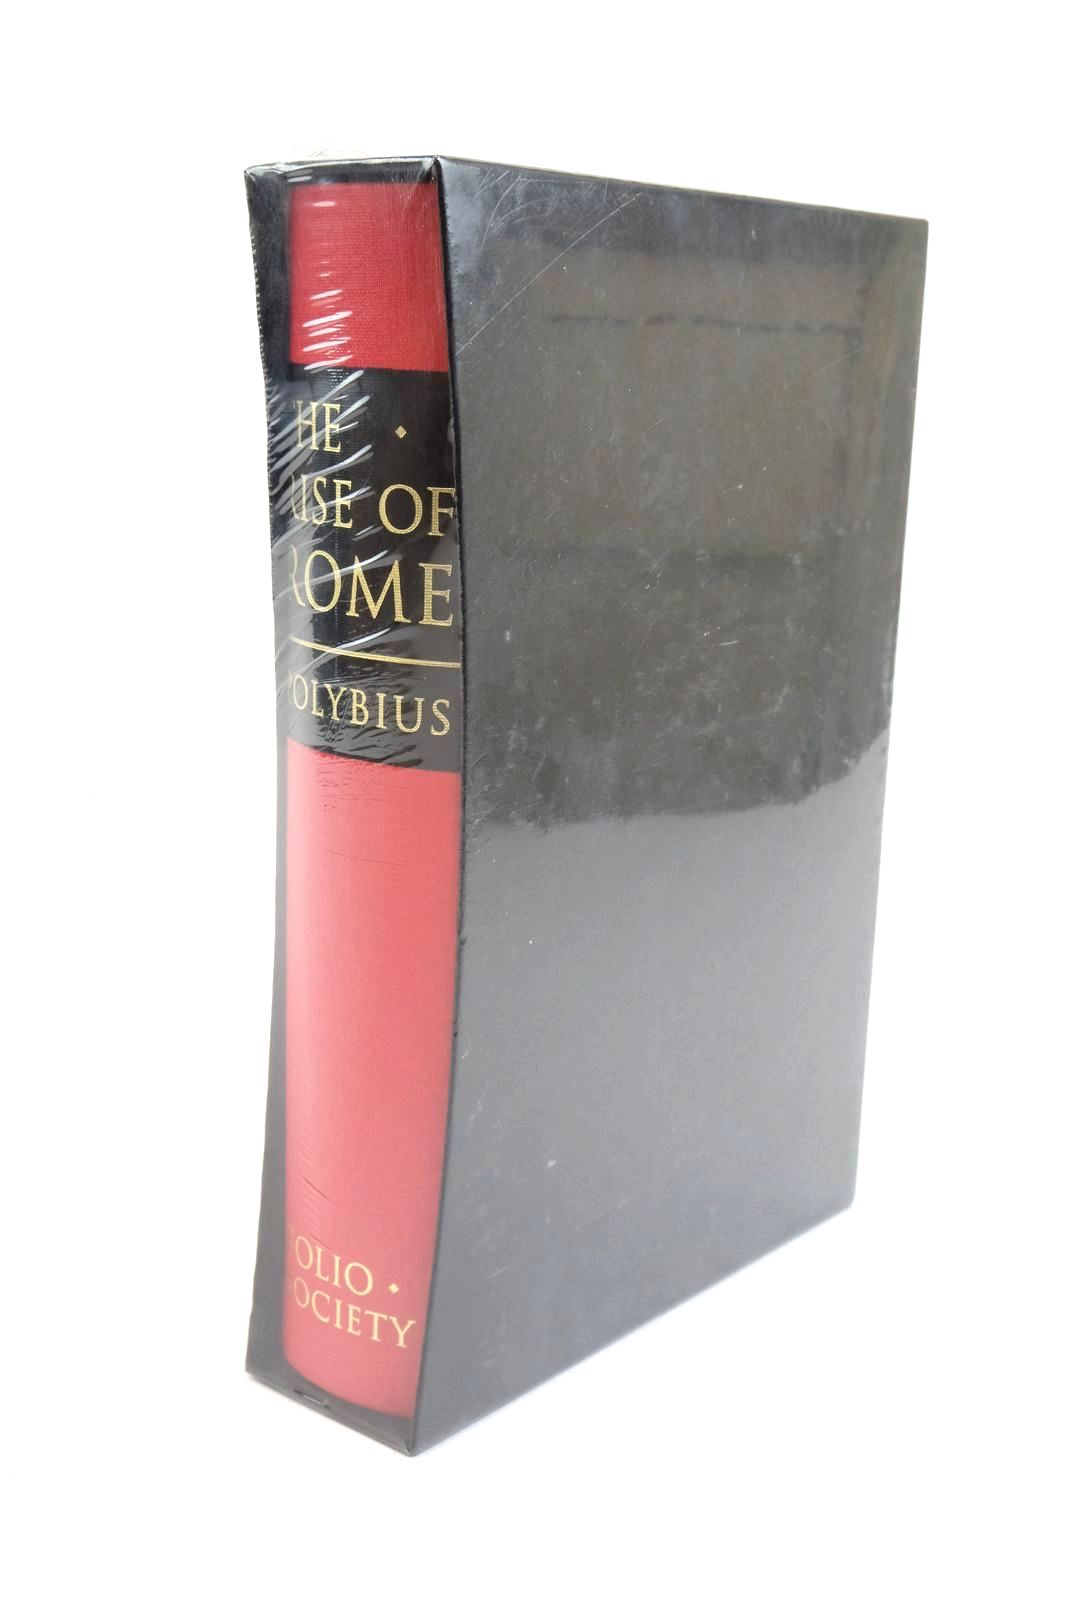 Photo of THE RISE OF ROME written by Polybius,  Waterfield, Robin Scott, Michael McGing, Brian published by Folio Society (STOCK CODE: 1322044)  for sale by Stella & Rose's Books